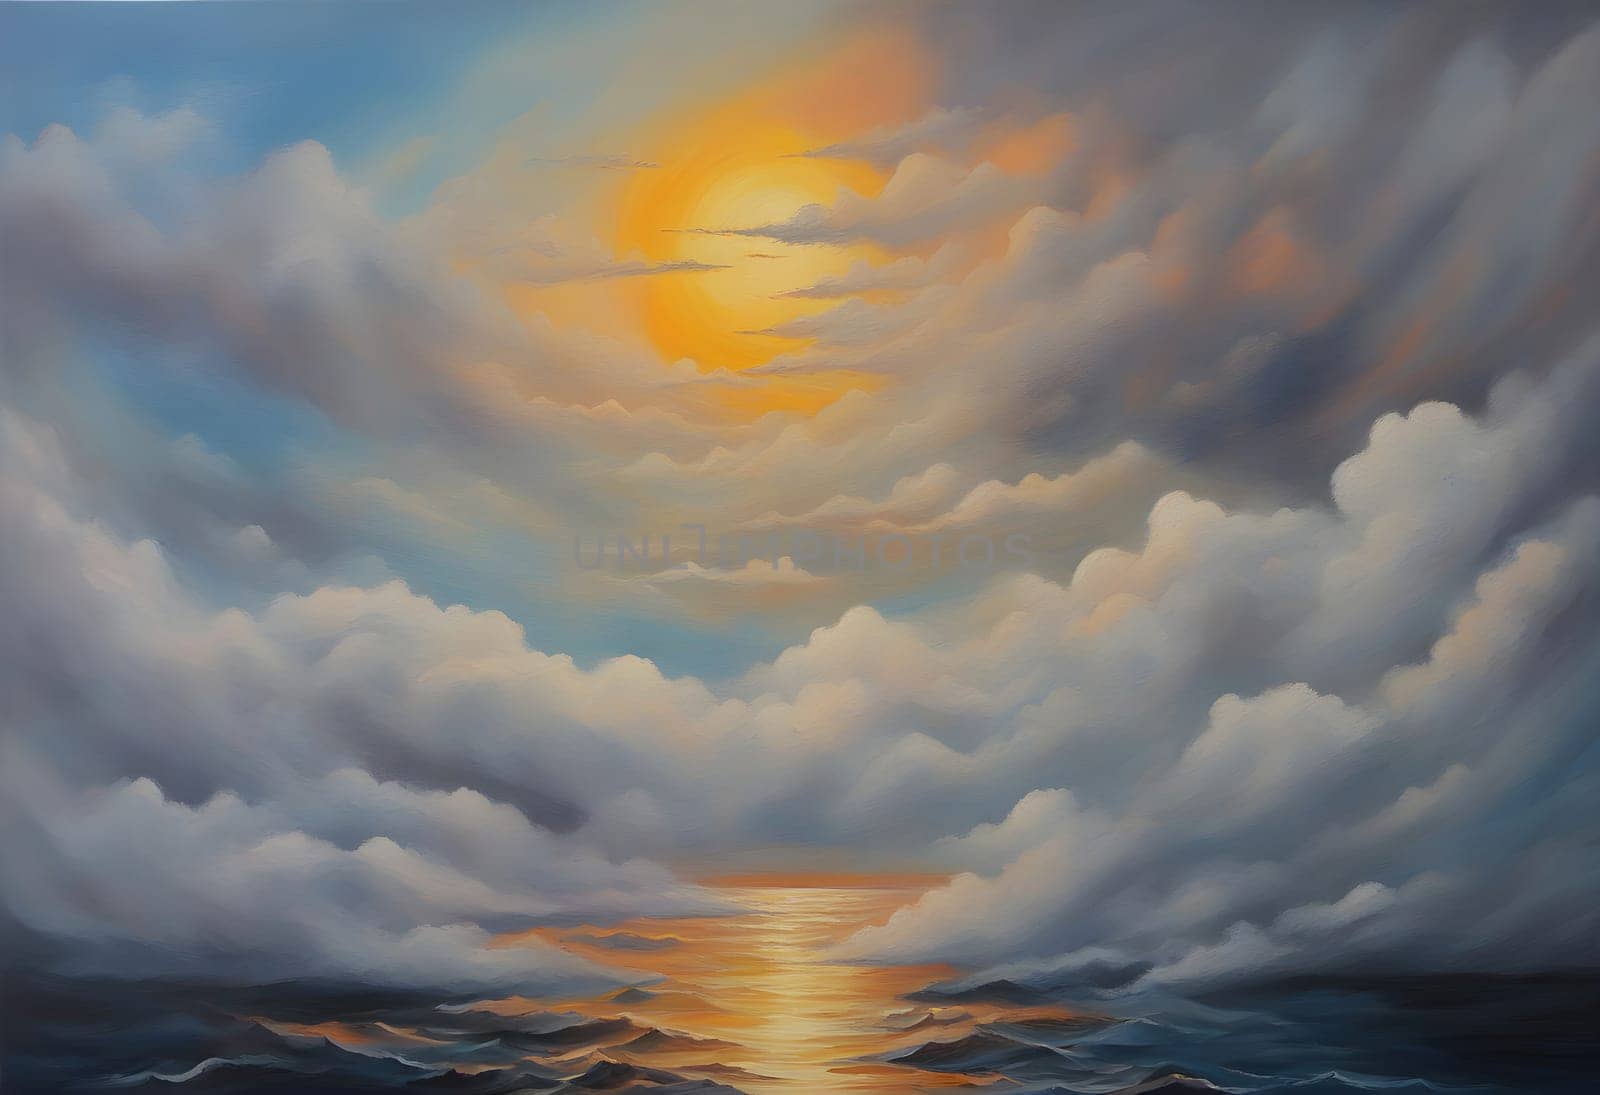 Painting acrylic on canvas Sea of clouds, clouds covered sun sets in the rough sea Generate AI